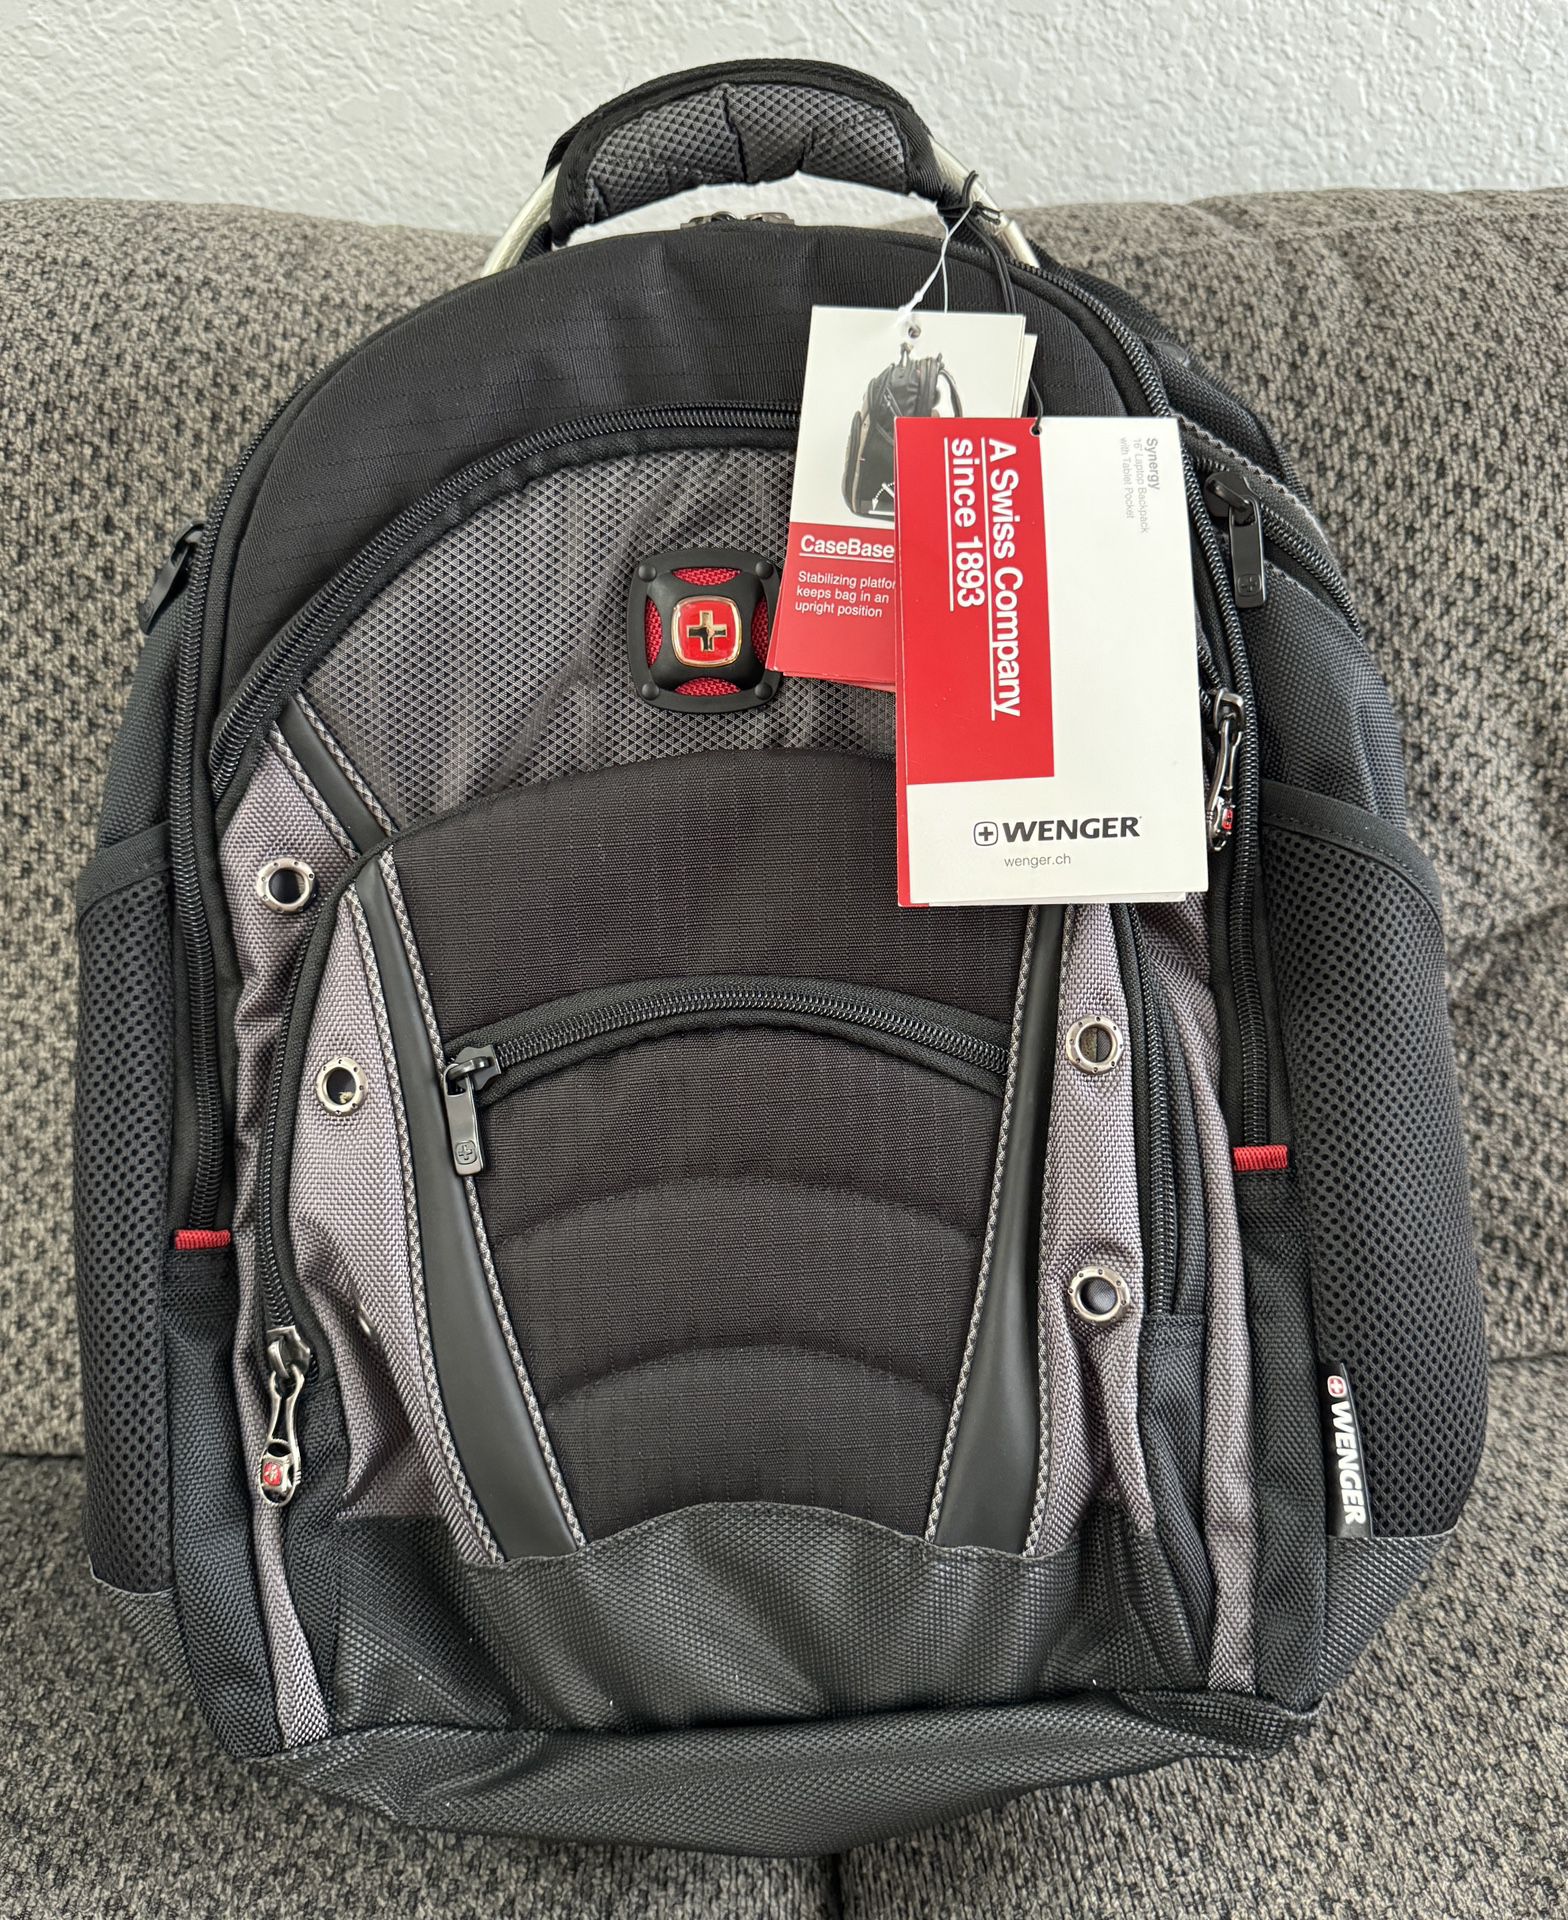 WENGER Synergy 16 inch Laptop Backpack - Black/Gray